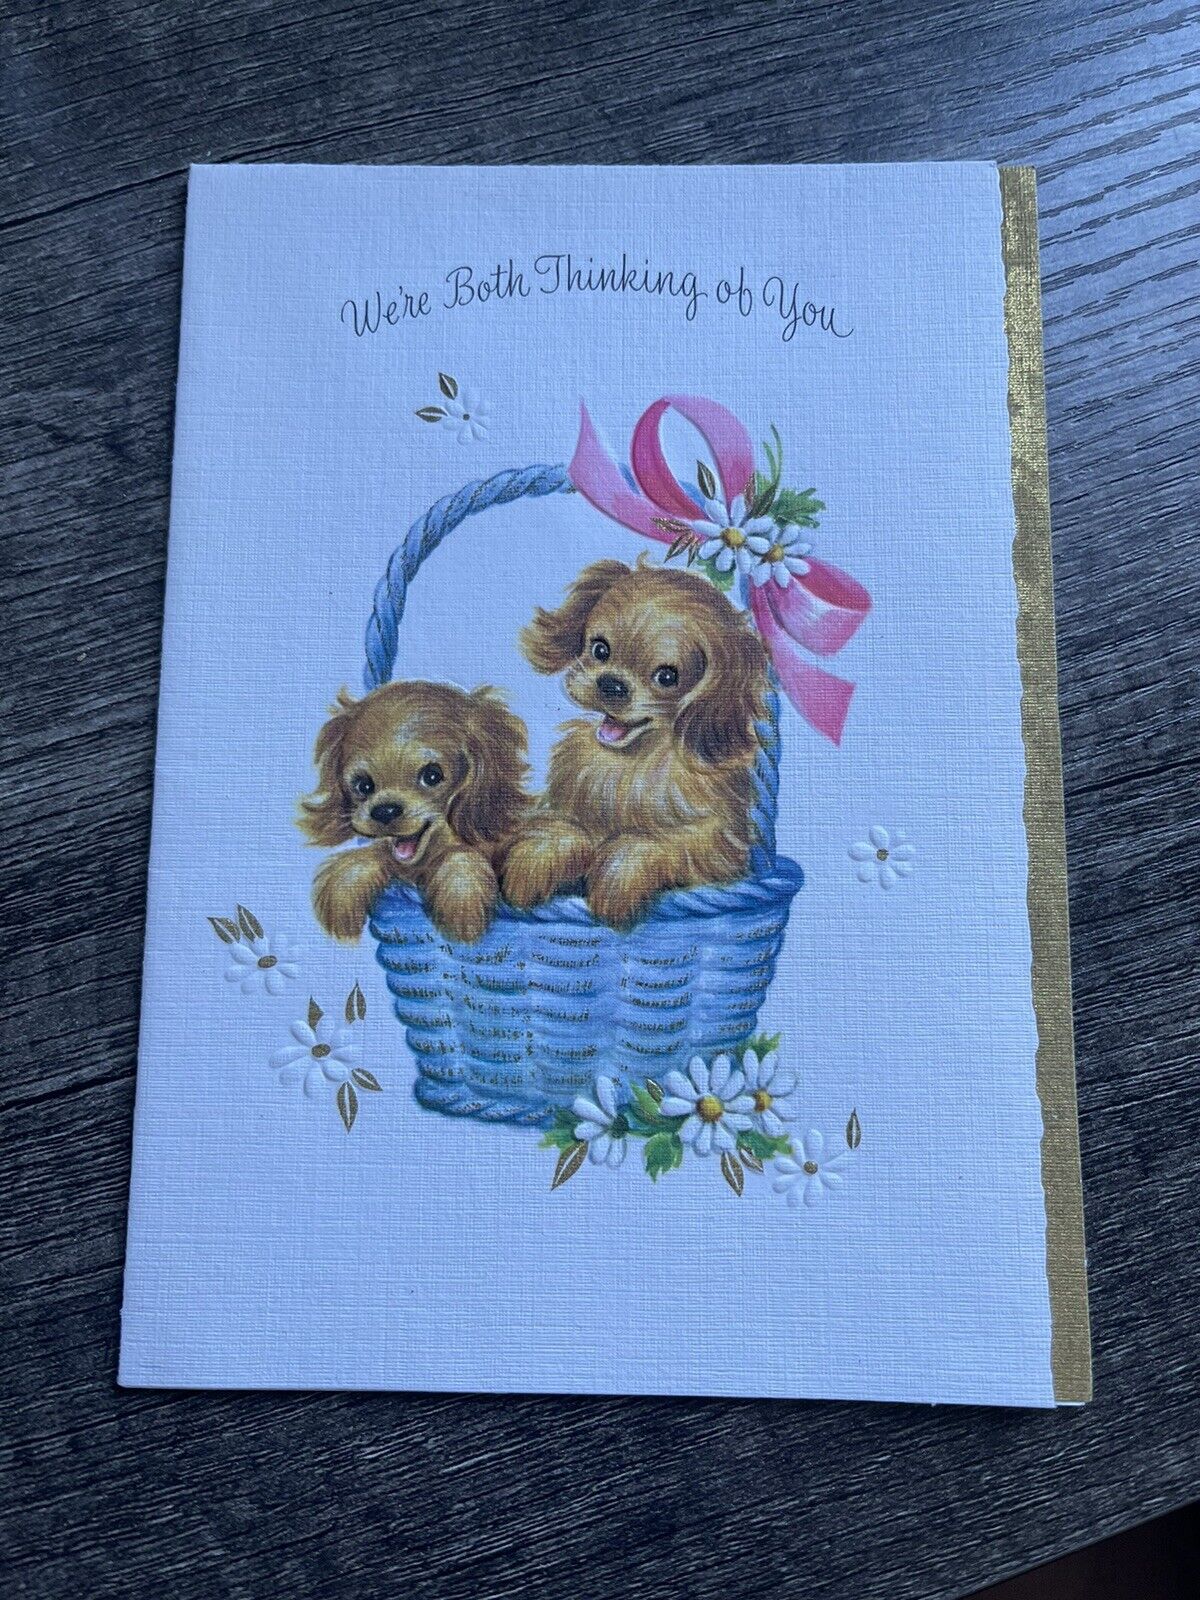 VINTAGE RUST CRAFT WERE BOTH THINKING OF YOU PUPPIES BASKET GREETING CARD